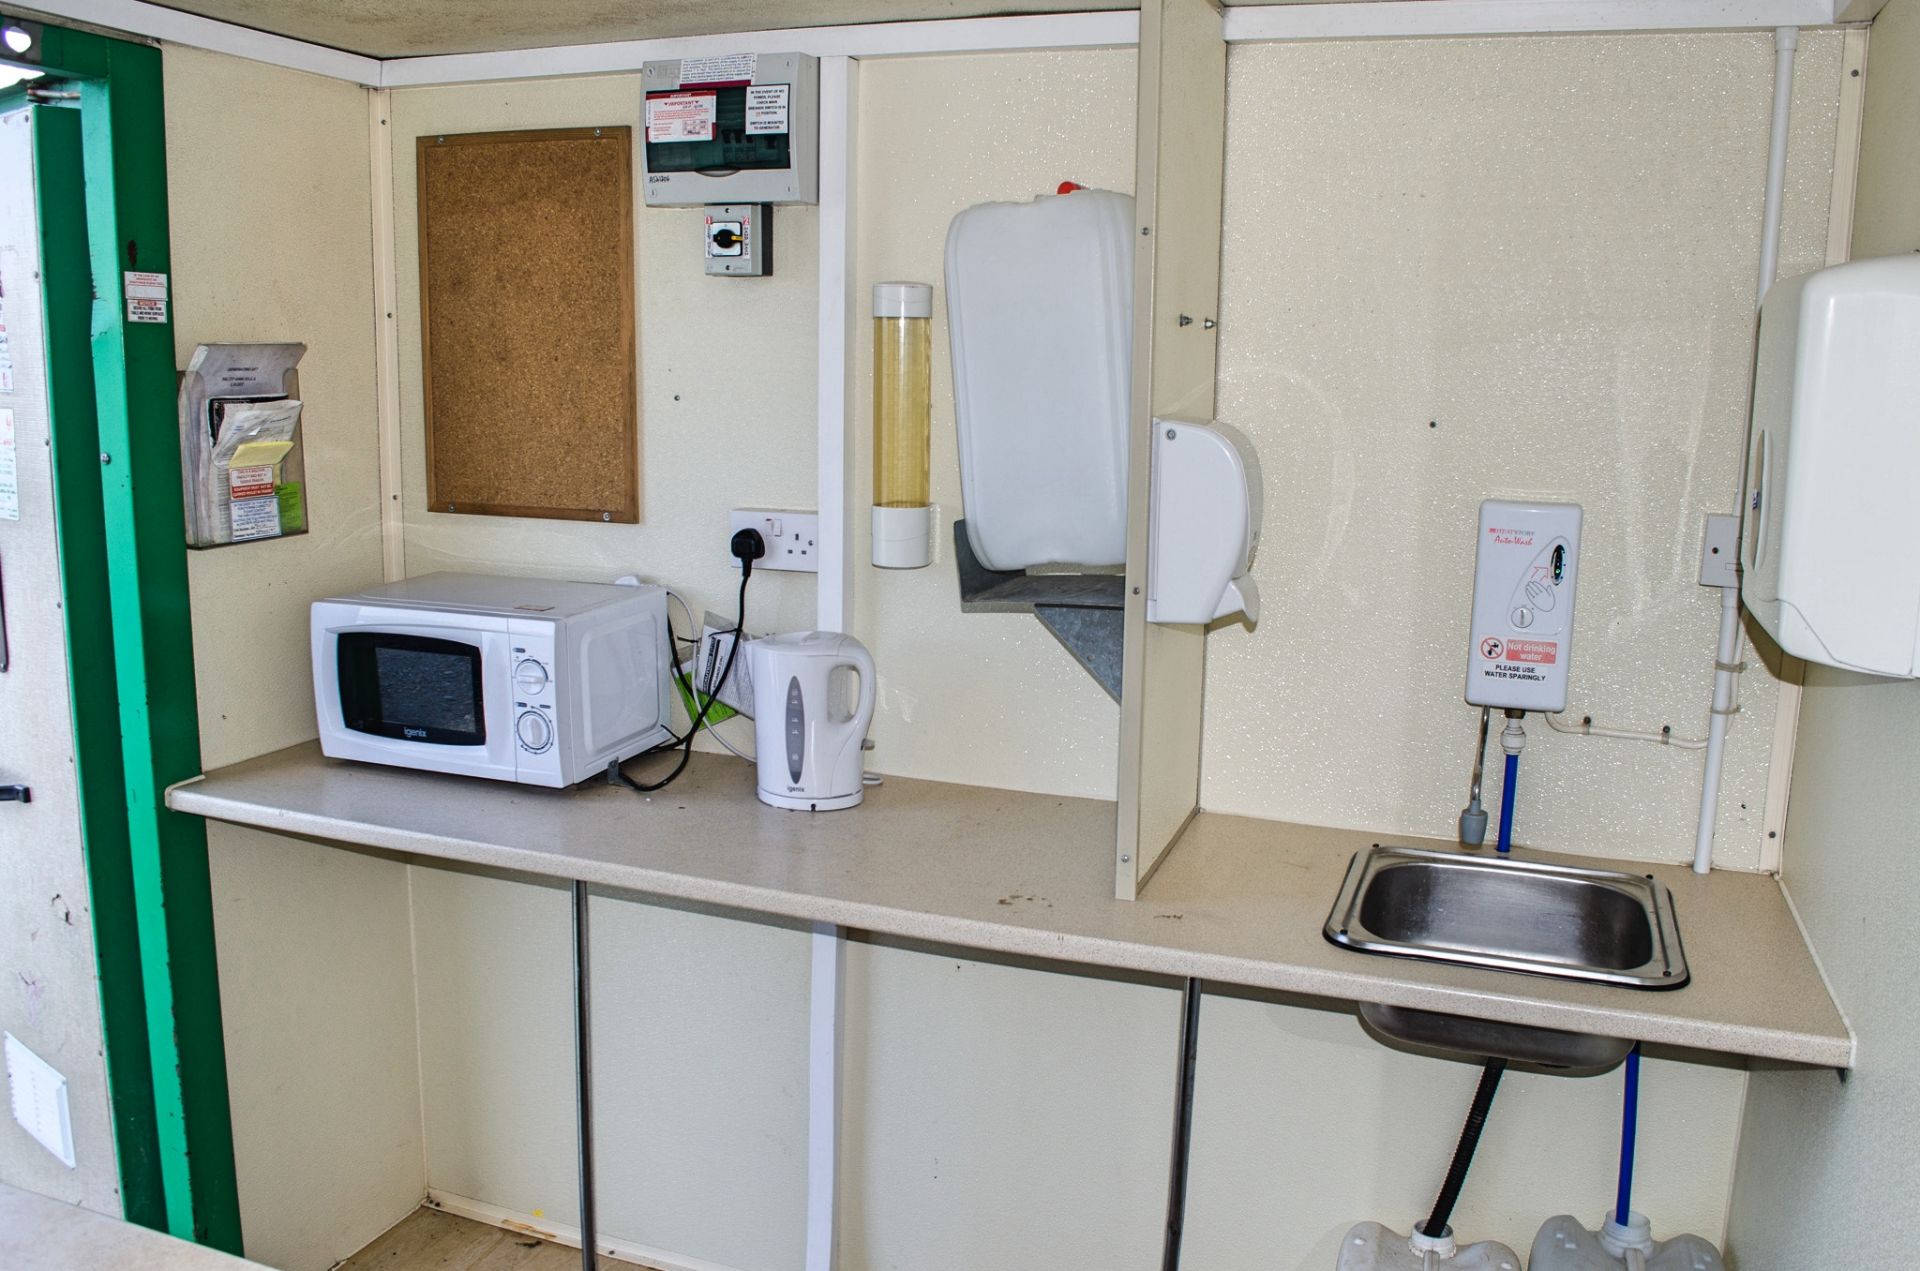 Groundhog 12 ft x 8 ft mobile welfare unit Comprising of: canteen area, toilet & generator room - Image 8 of 12